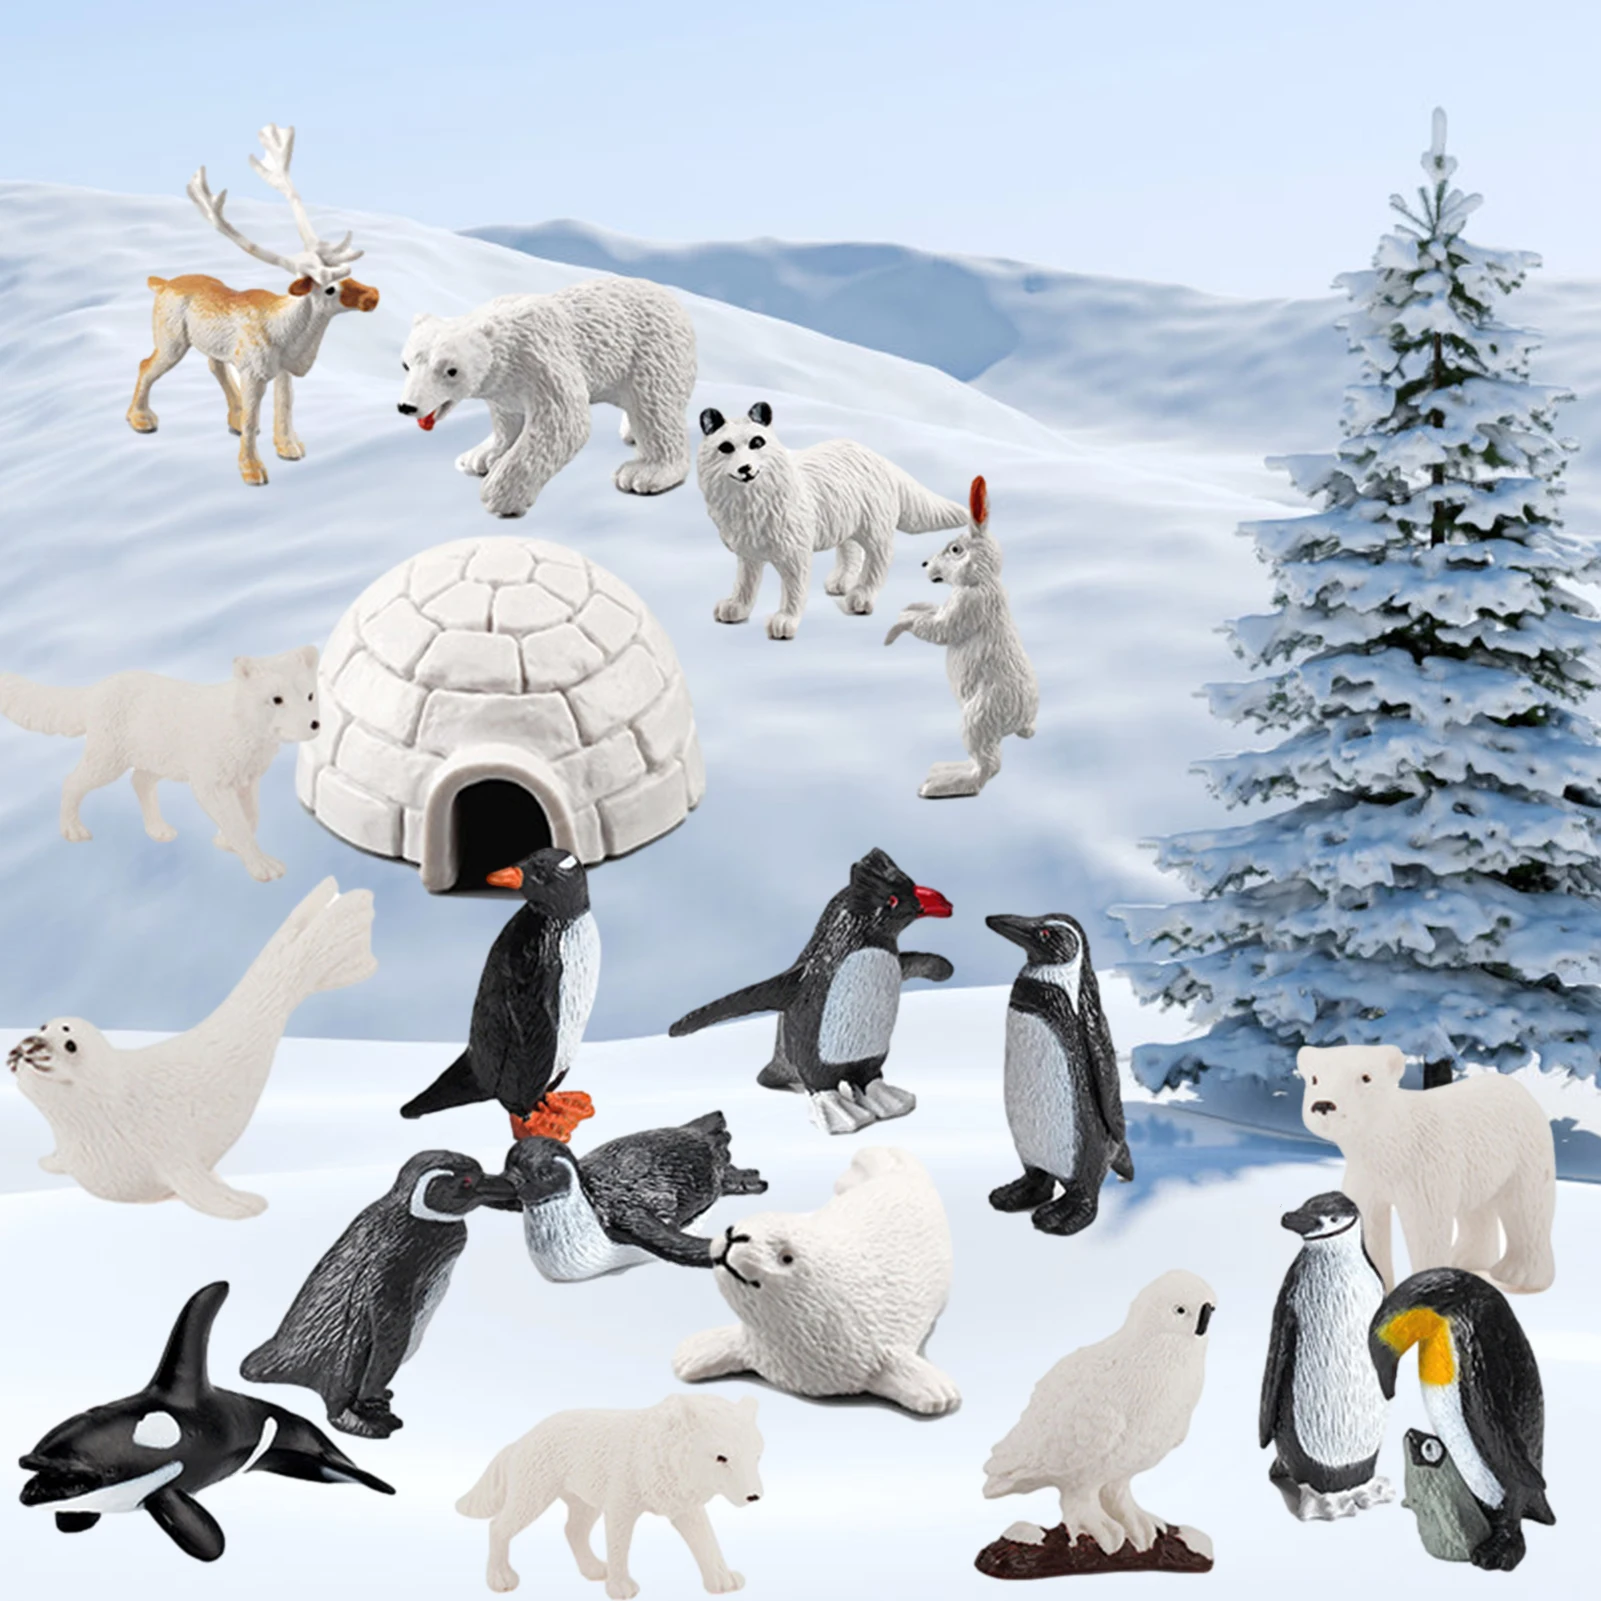 

26pcs Realistic Arctic Animals Model North Pole Bear Reindeer Seal Penguins Igloo Action Figurines Toys For Kids Birthday Gifts